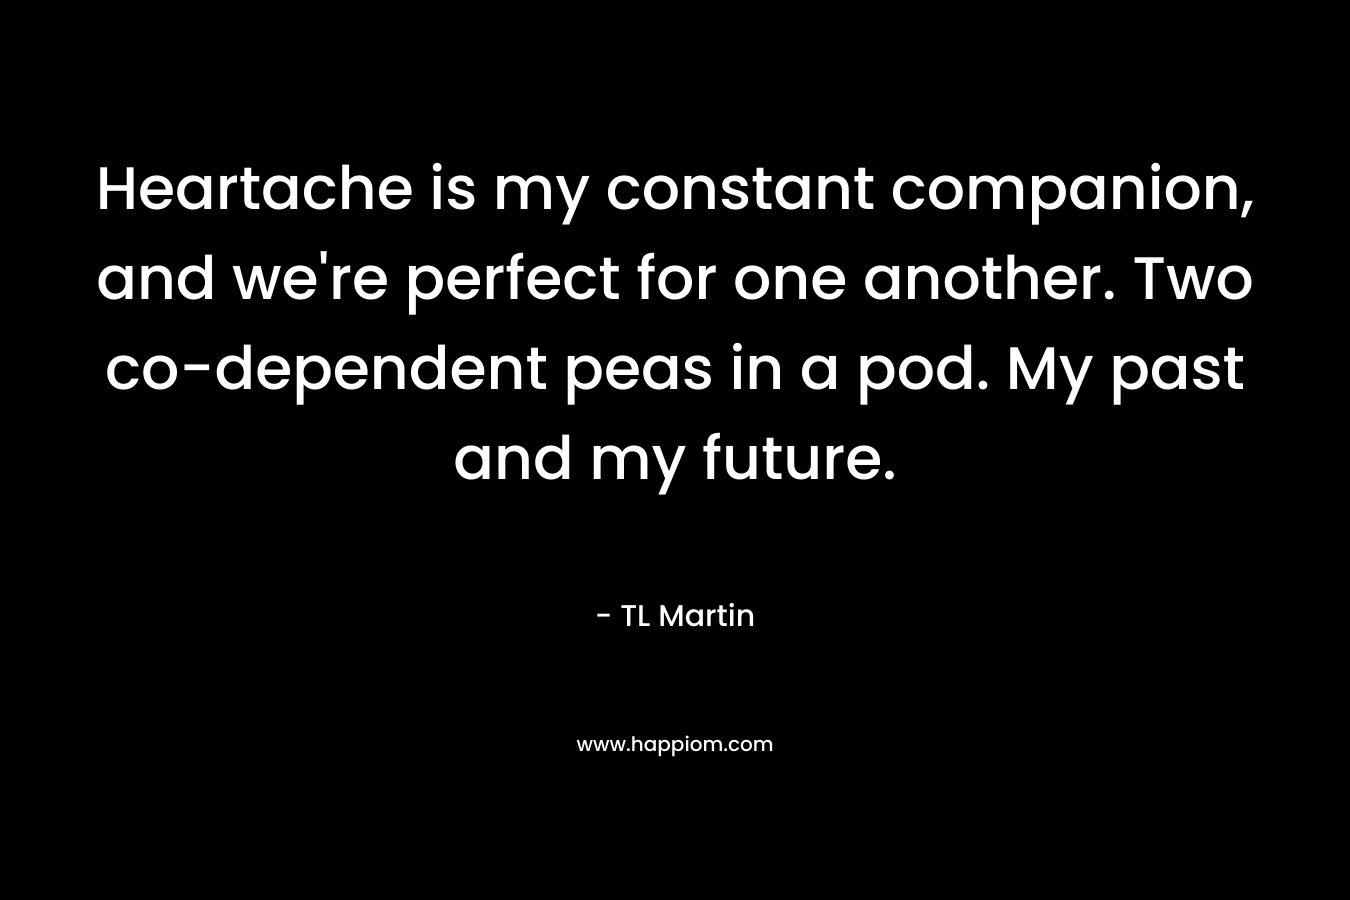 Heartache is my constant companion, and we’re perfect for one another. Two co-dependent peas in a pod. My past and my future. – TL Martin